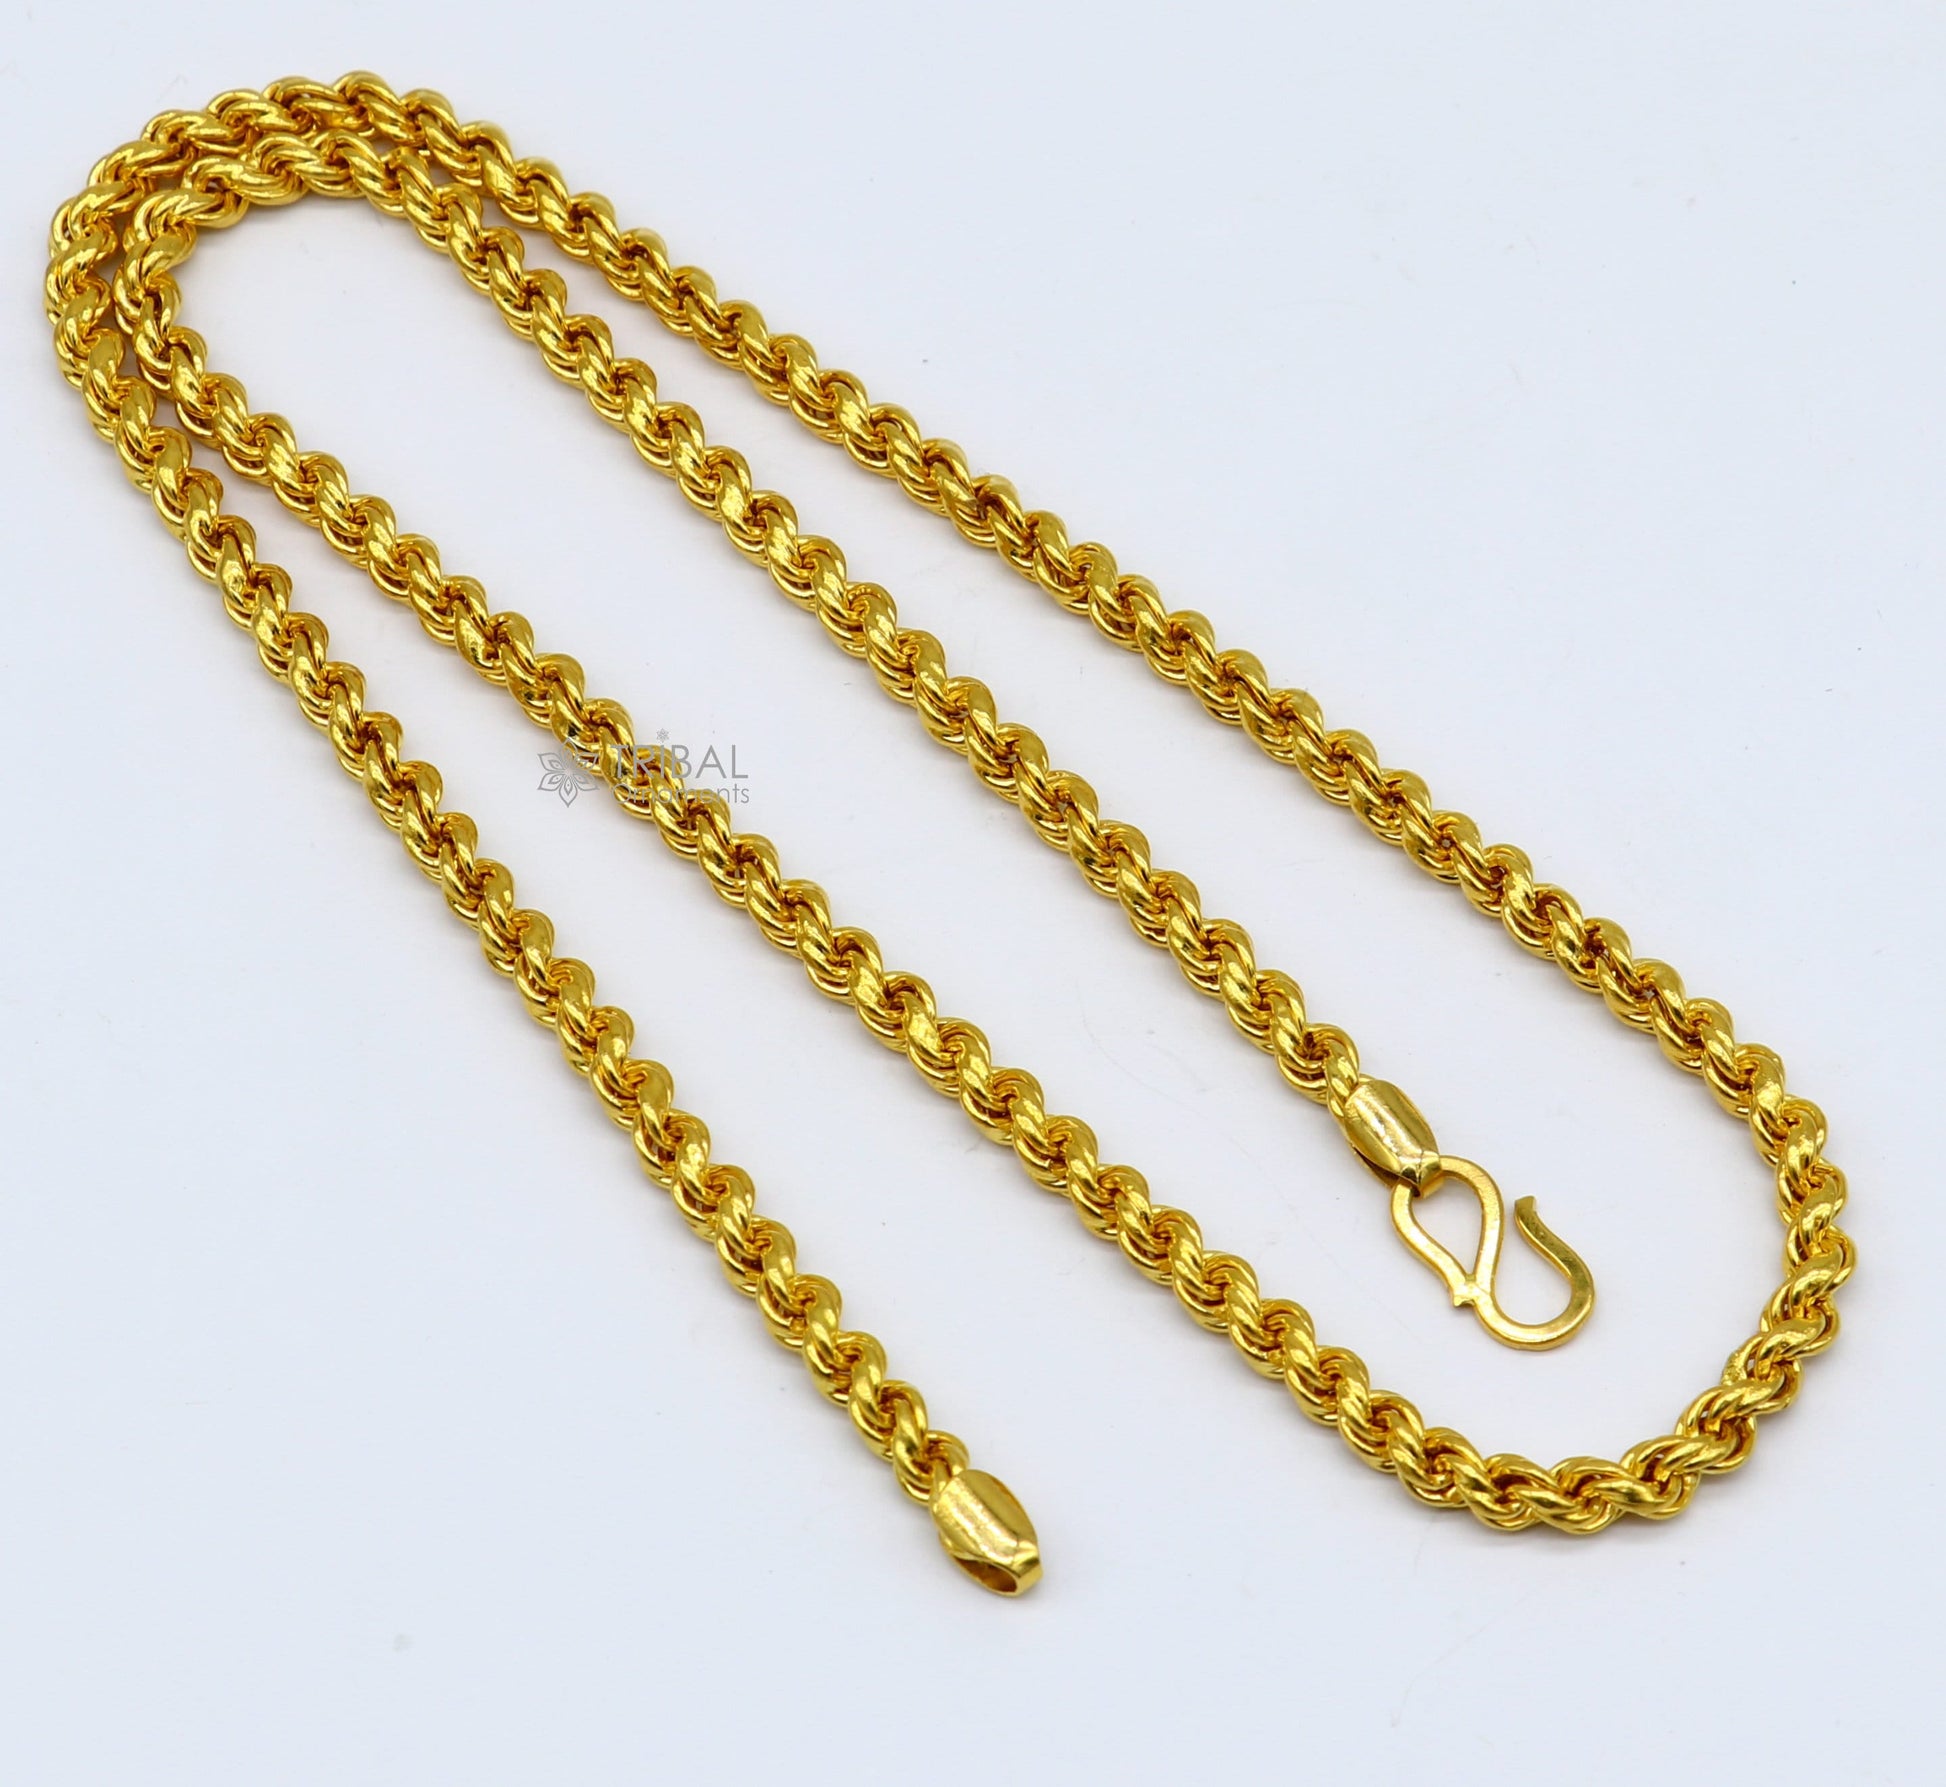 4mm 22k yellow gold handmade fabulous Rope chain necklace excellent gold unisex chain certified best gifting jewelry gch587 - TRIBAL ORNAMENTS